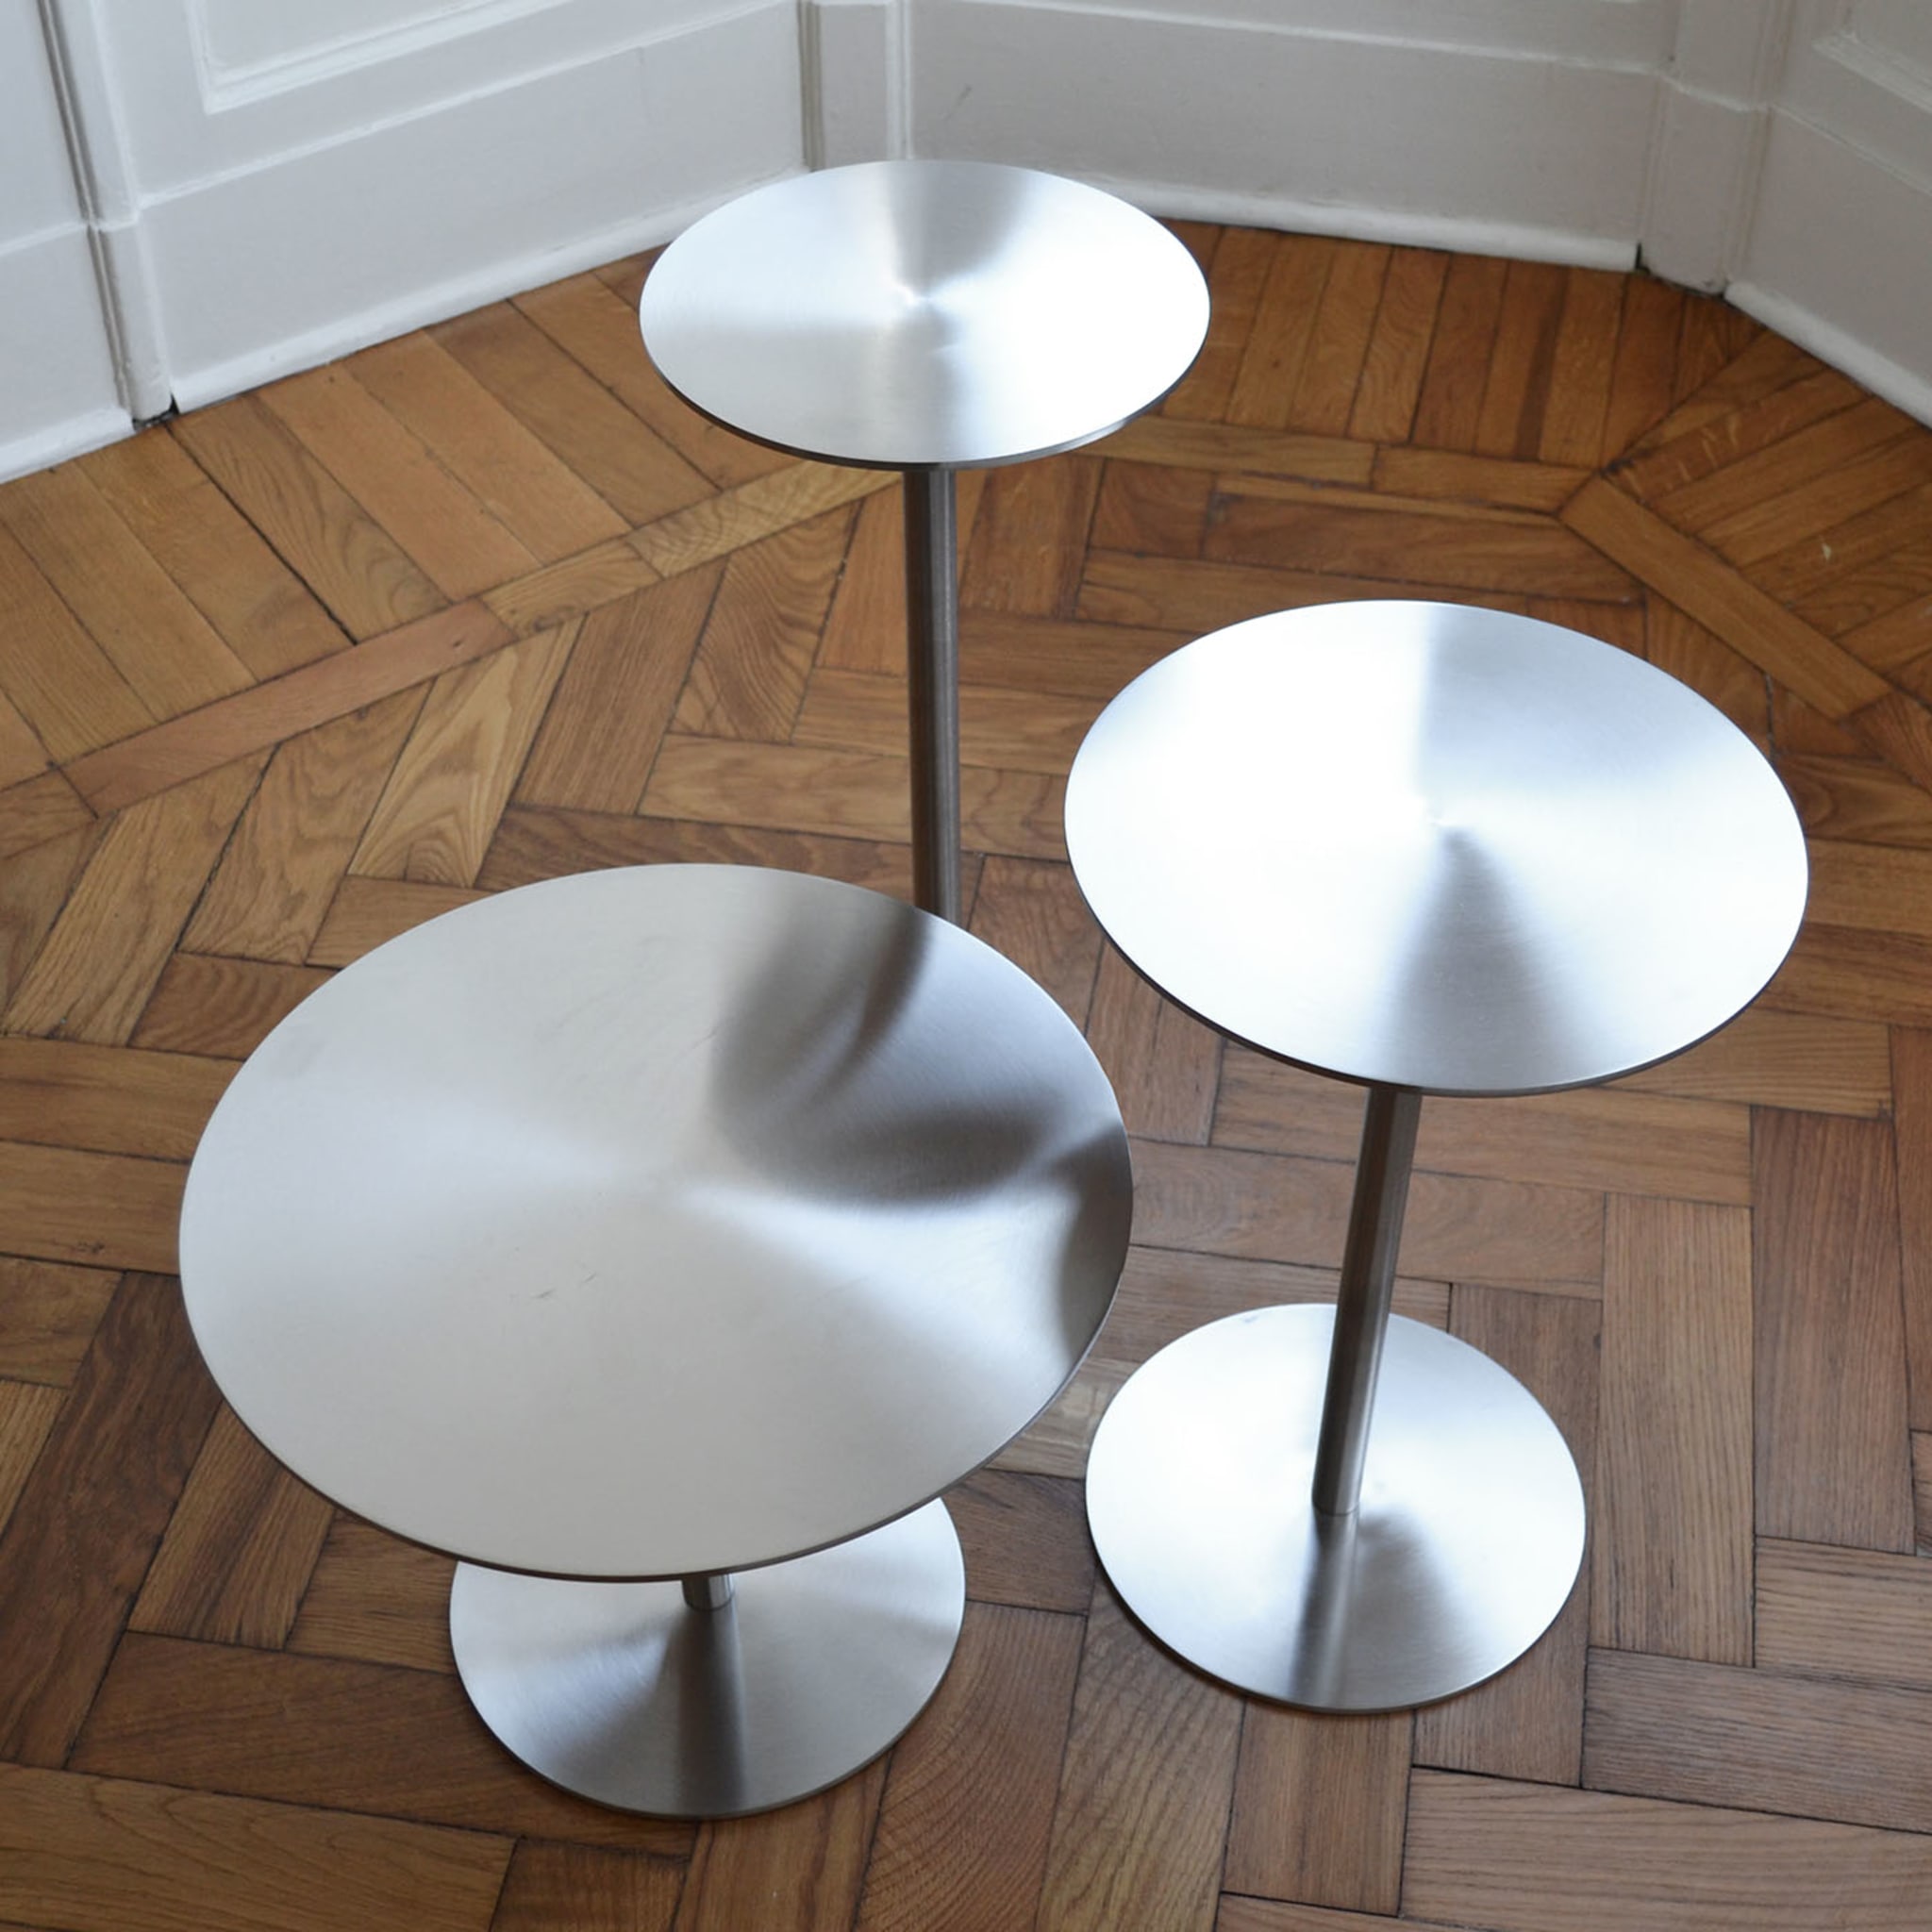 Ester Stainless Steel Table - Alternative view 3